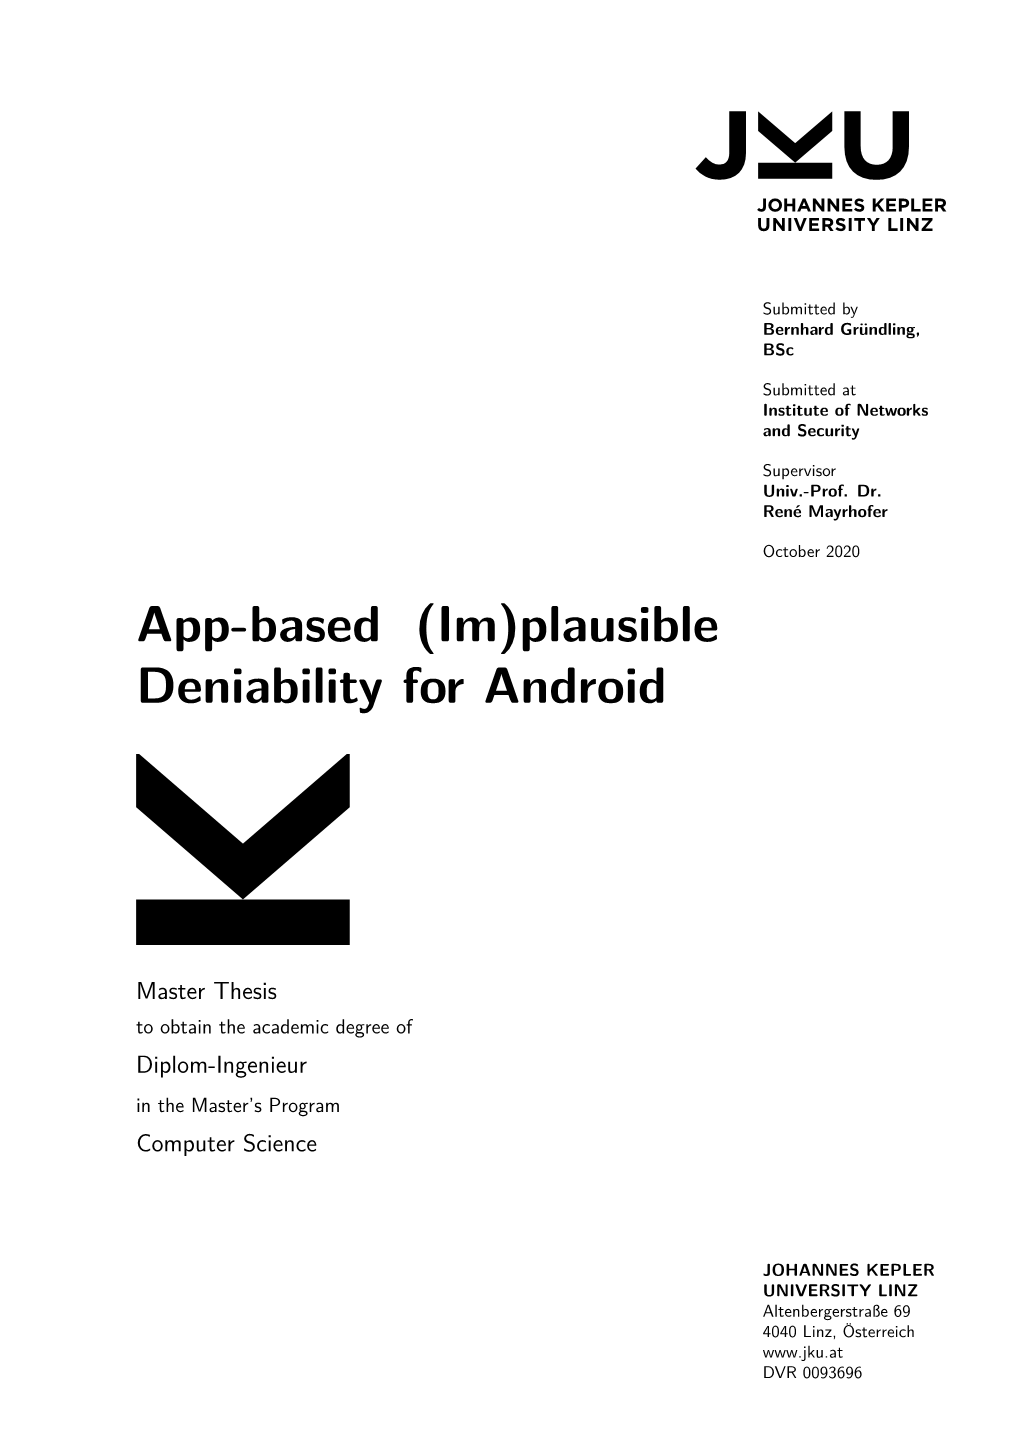 Plausible Deniability for Android